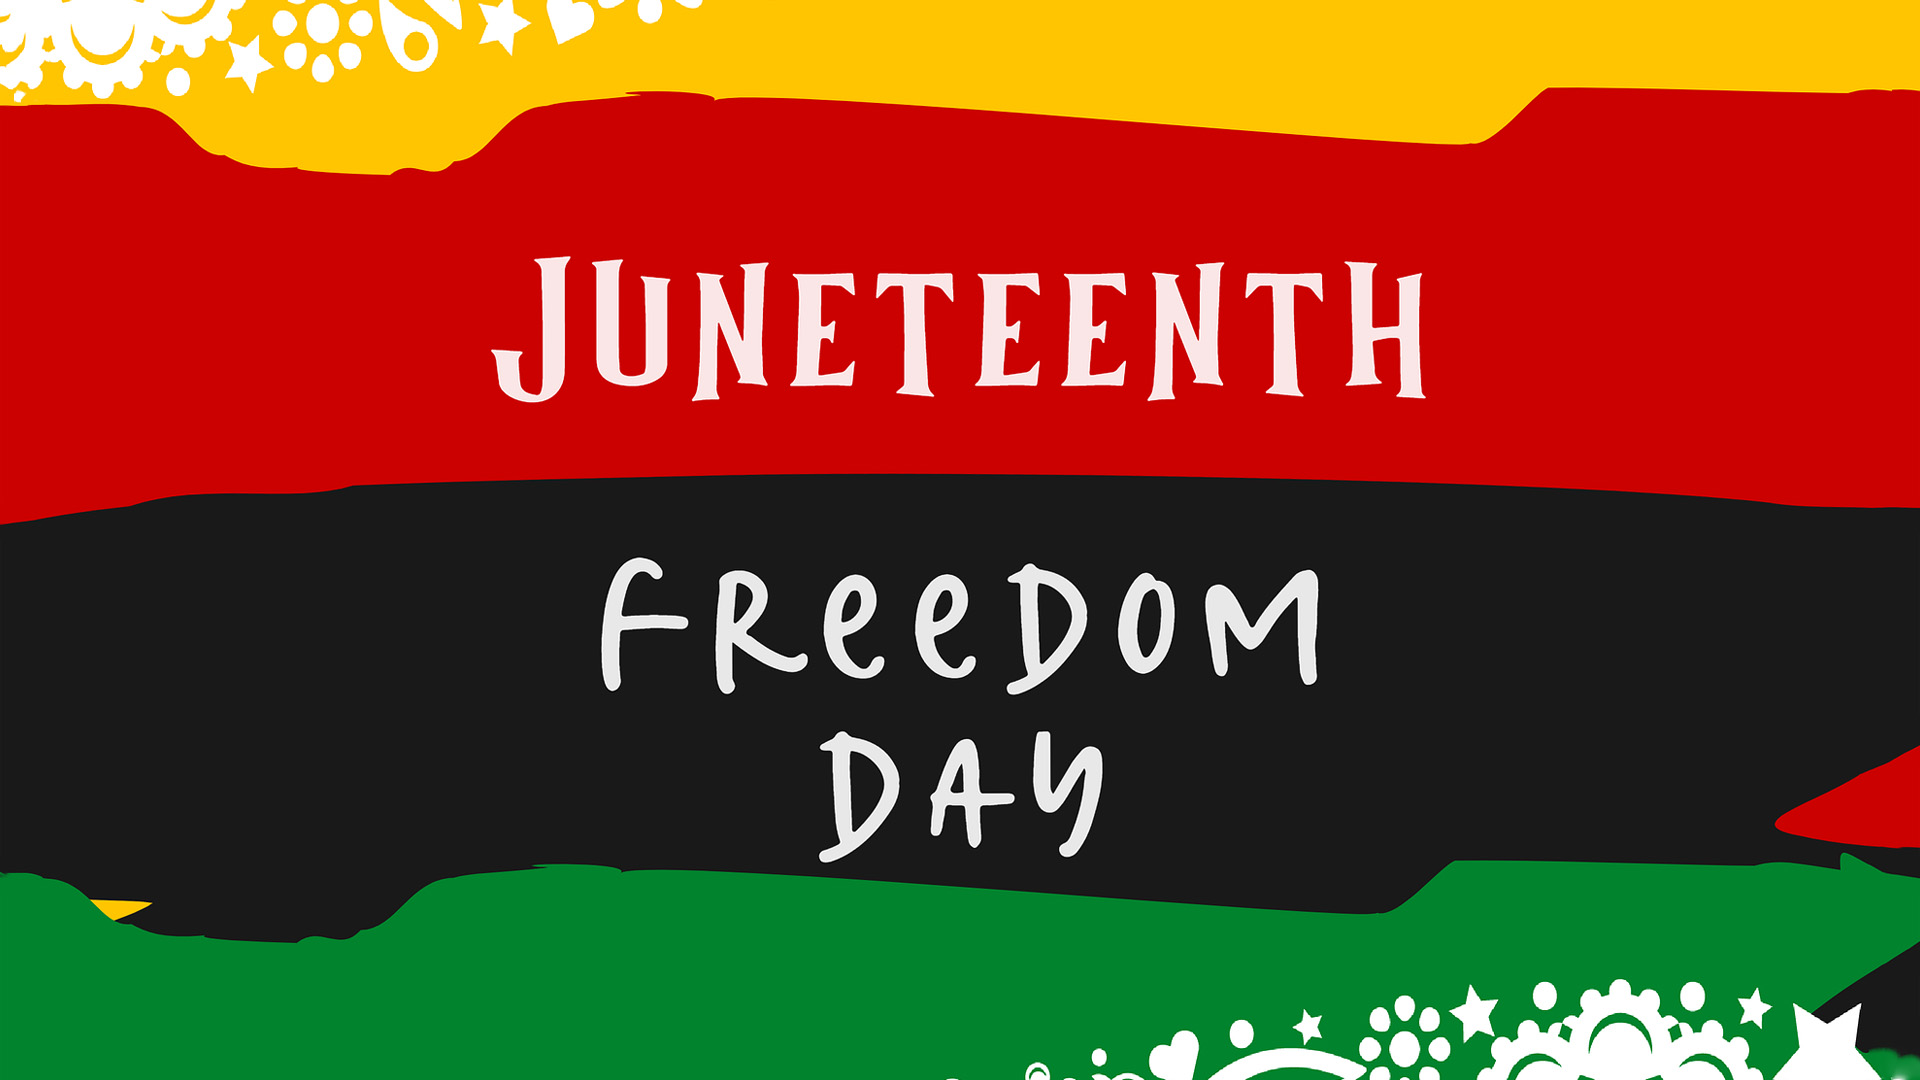 Yellow, red, black and green organic lines swipe across the graphic with Juneteenth Freedom Day written in white text in the center of the graphic